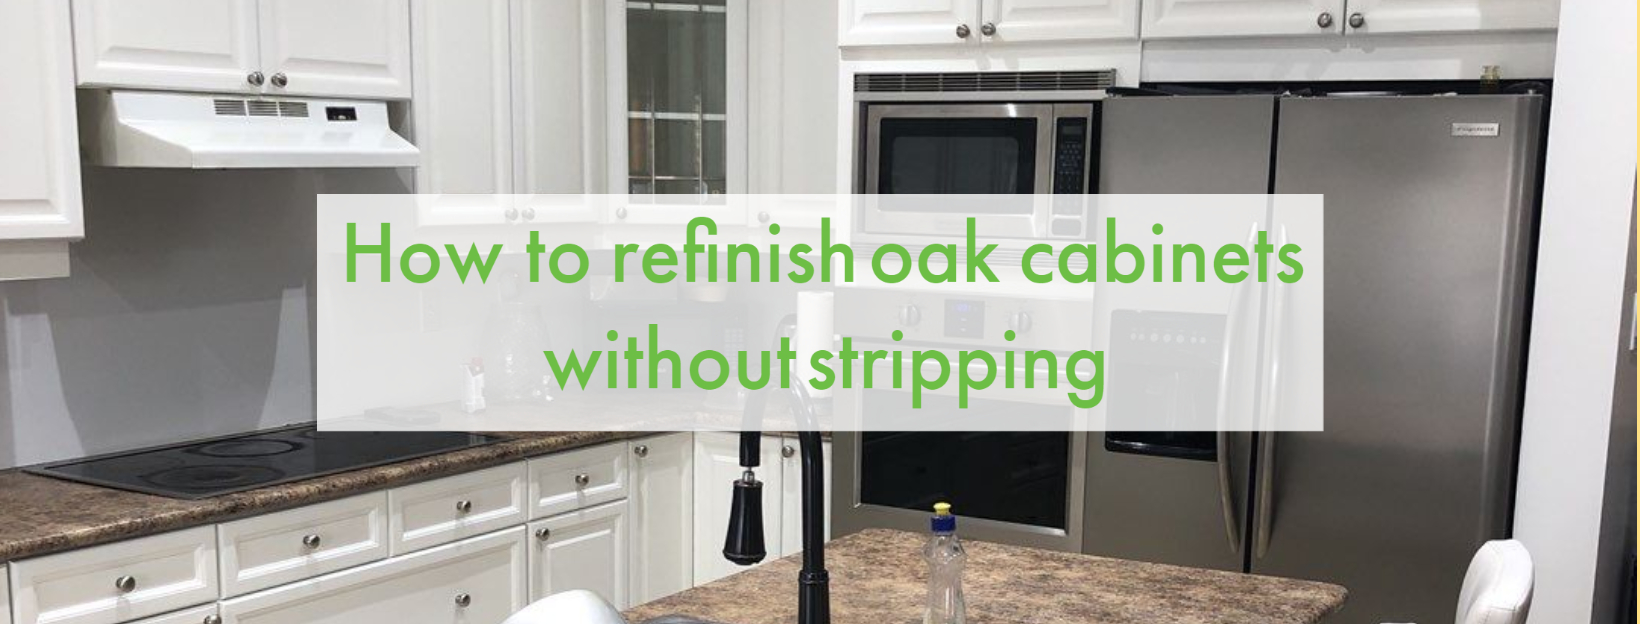 how to refinish oak cabinets without stripping - home painters